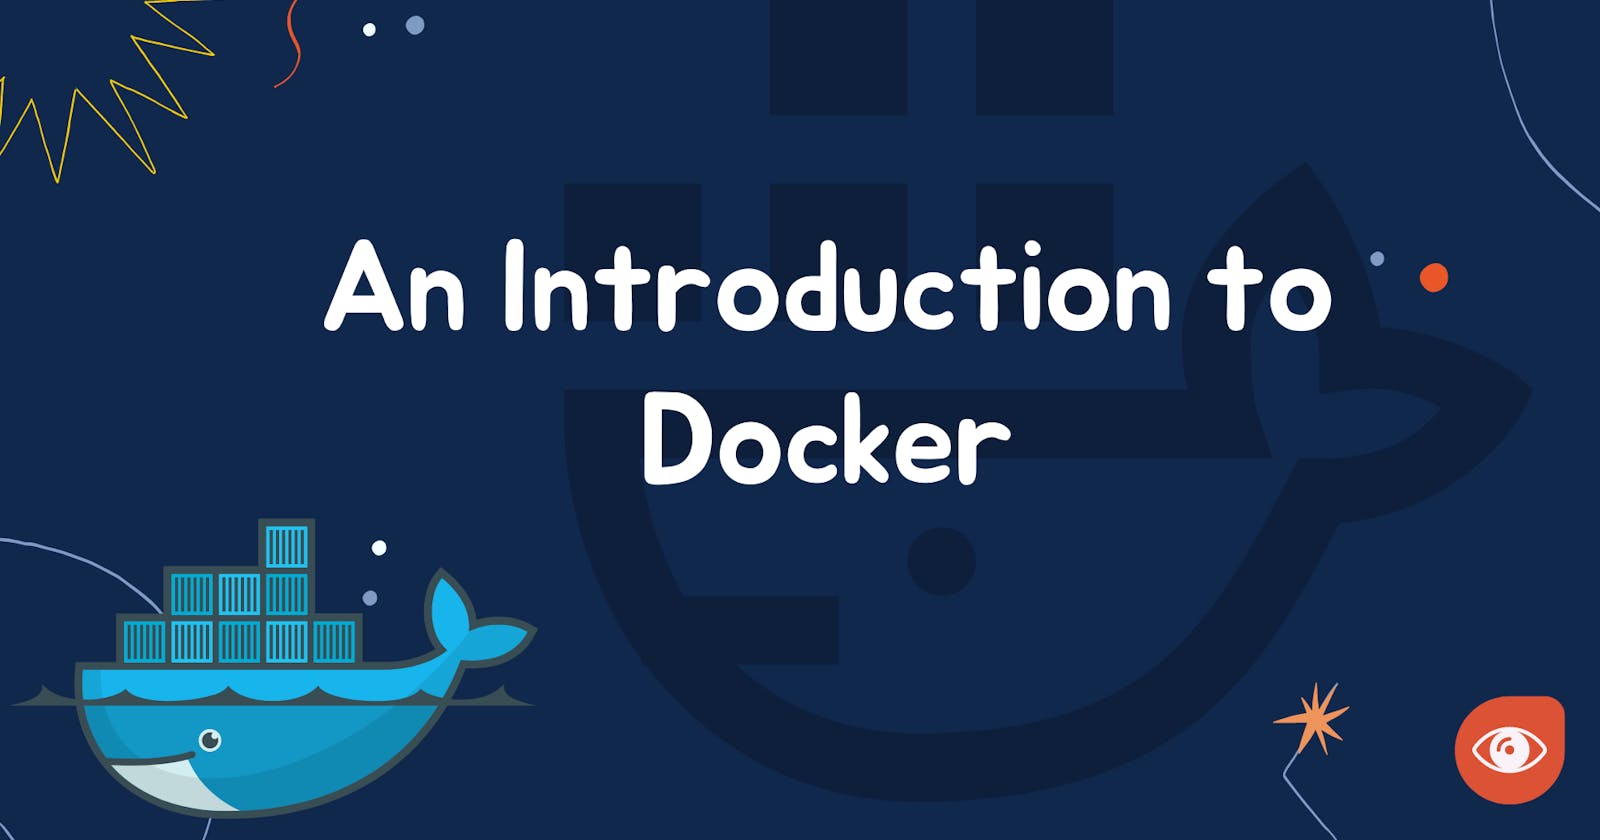 An introduction to Docker